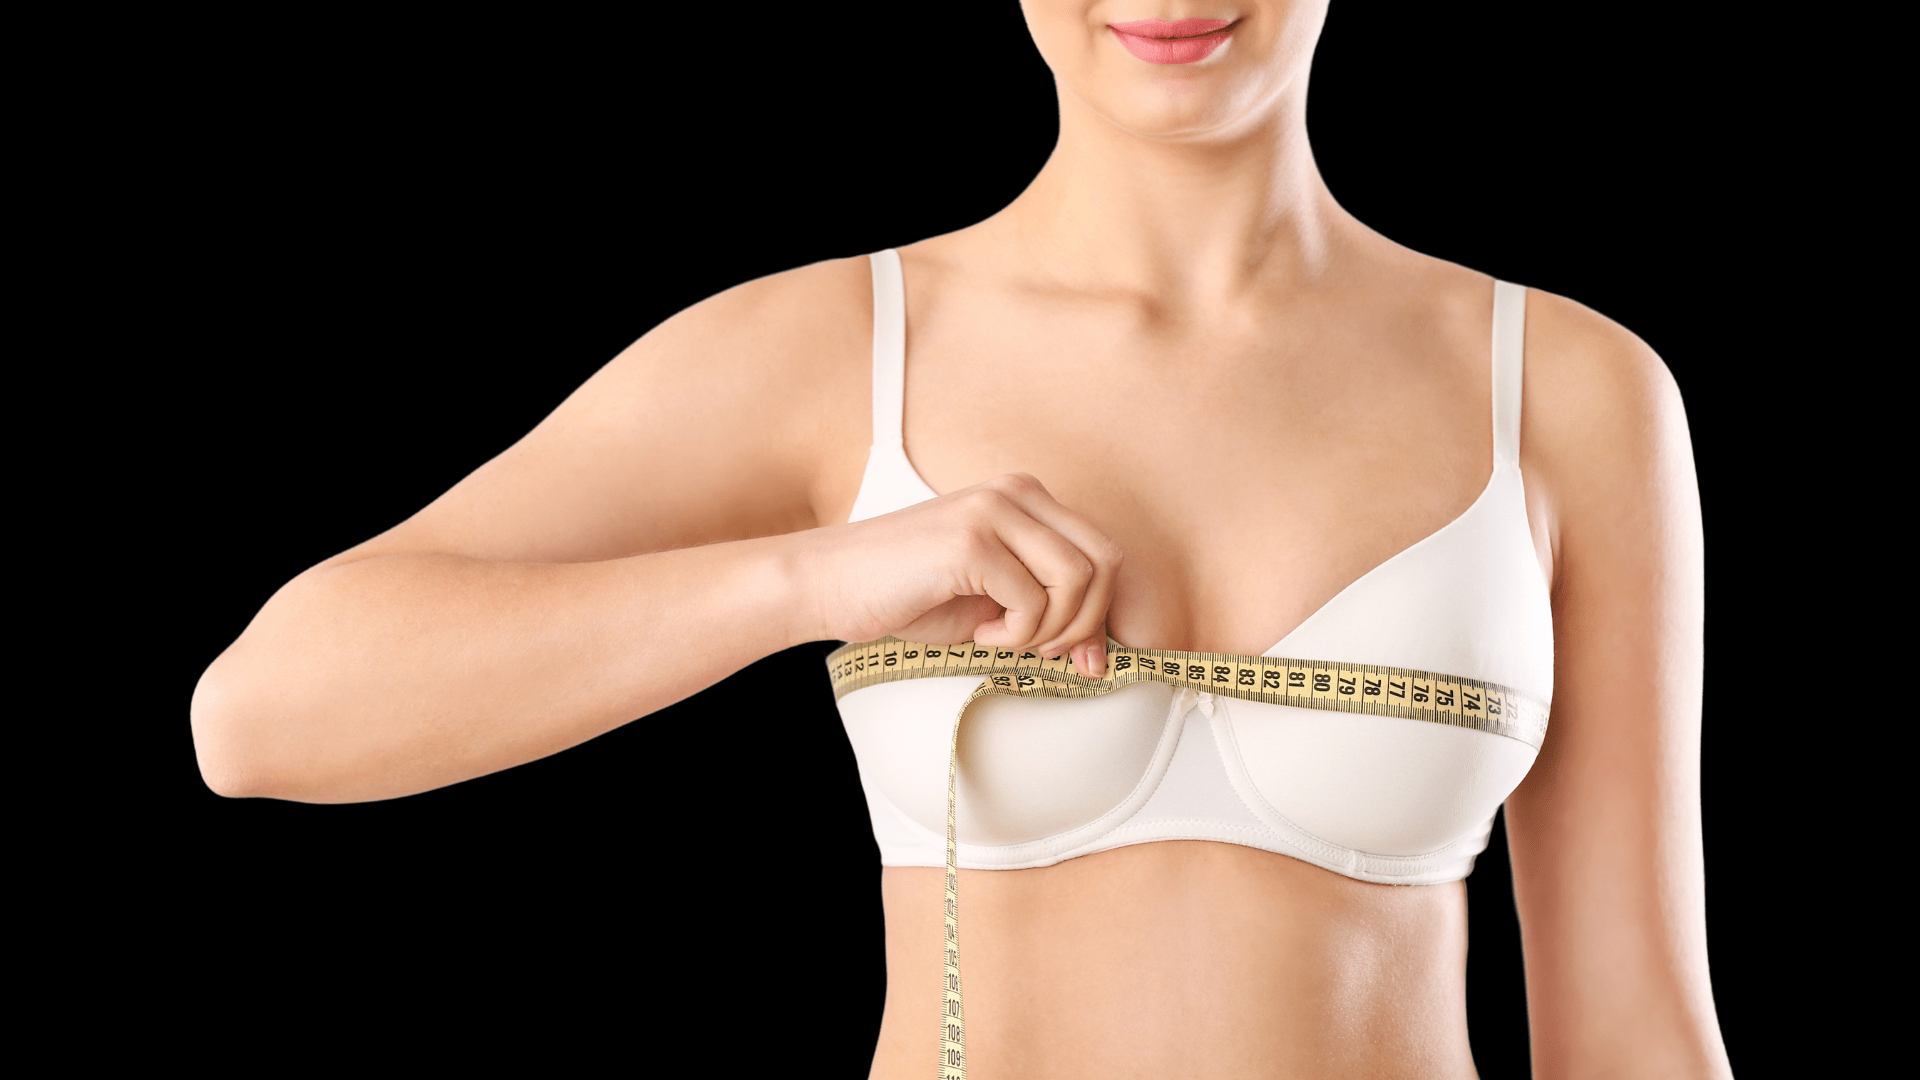 Female breasts in bra after augmentation or breast size correction